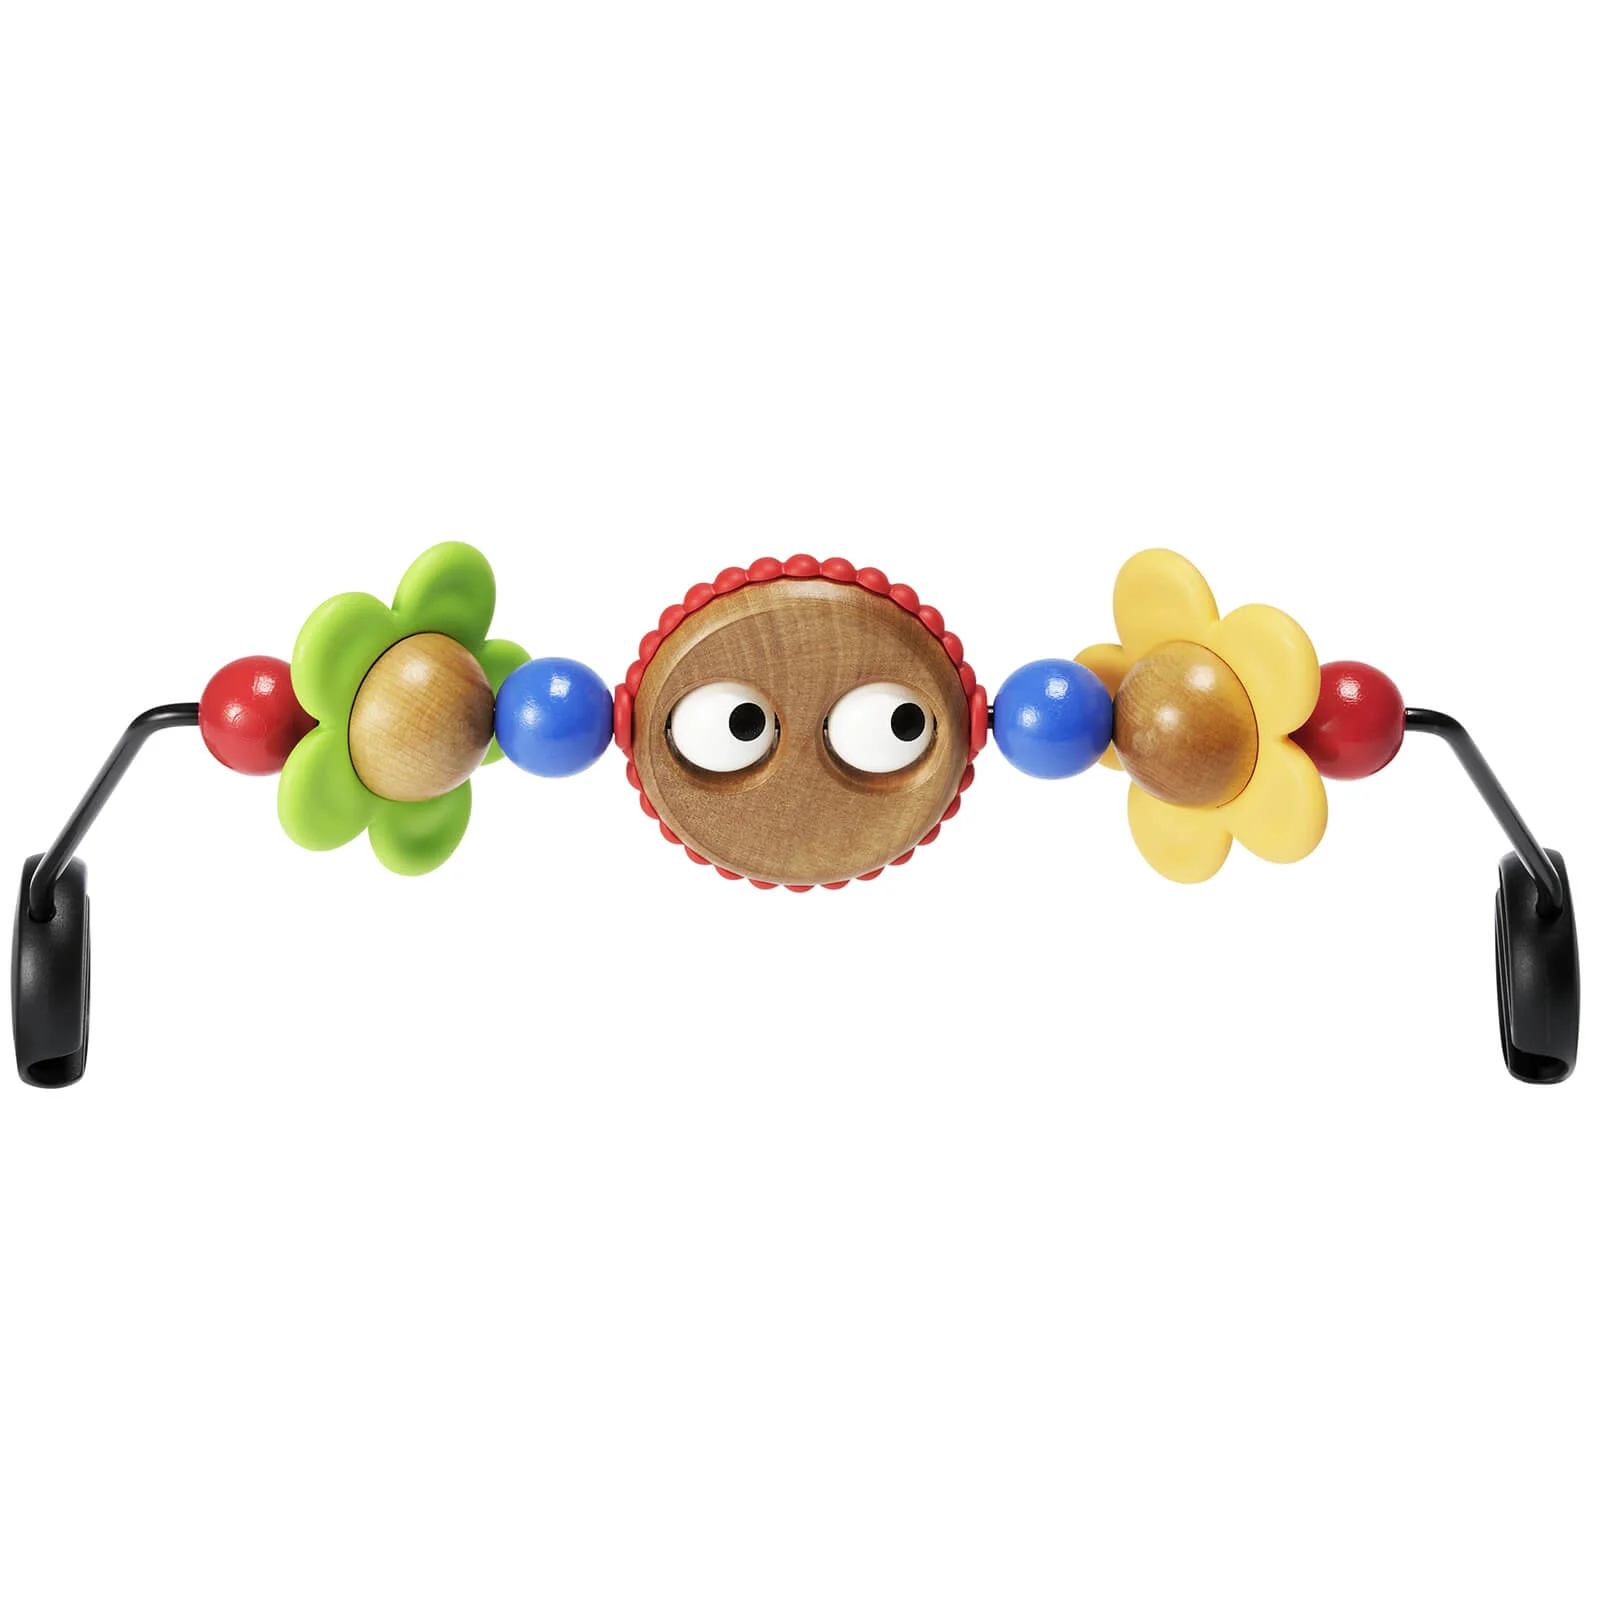 BABYBJÖRN Toy for Bouncers - Googly Eyes Image 1